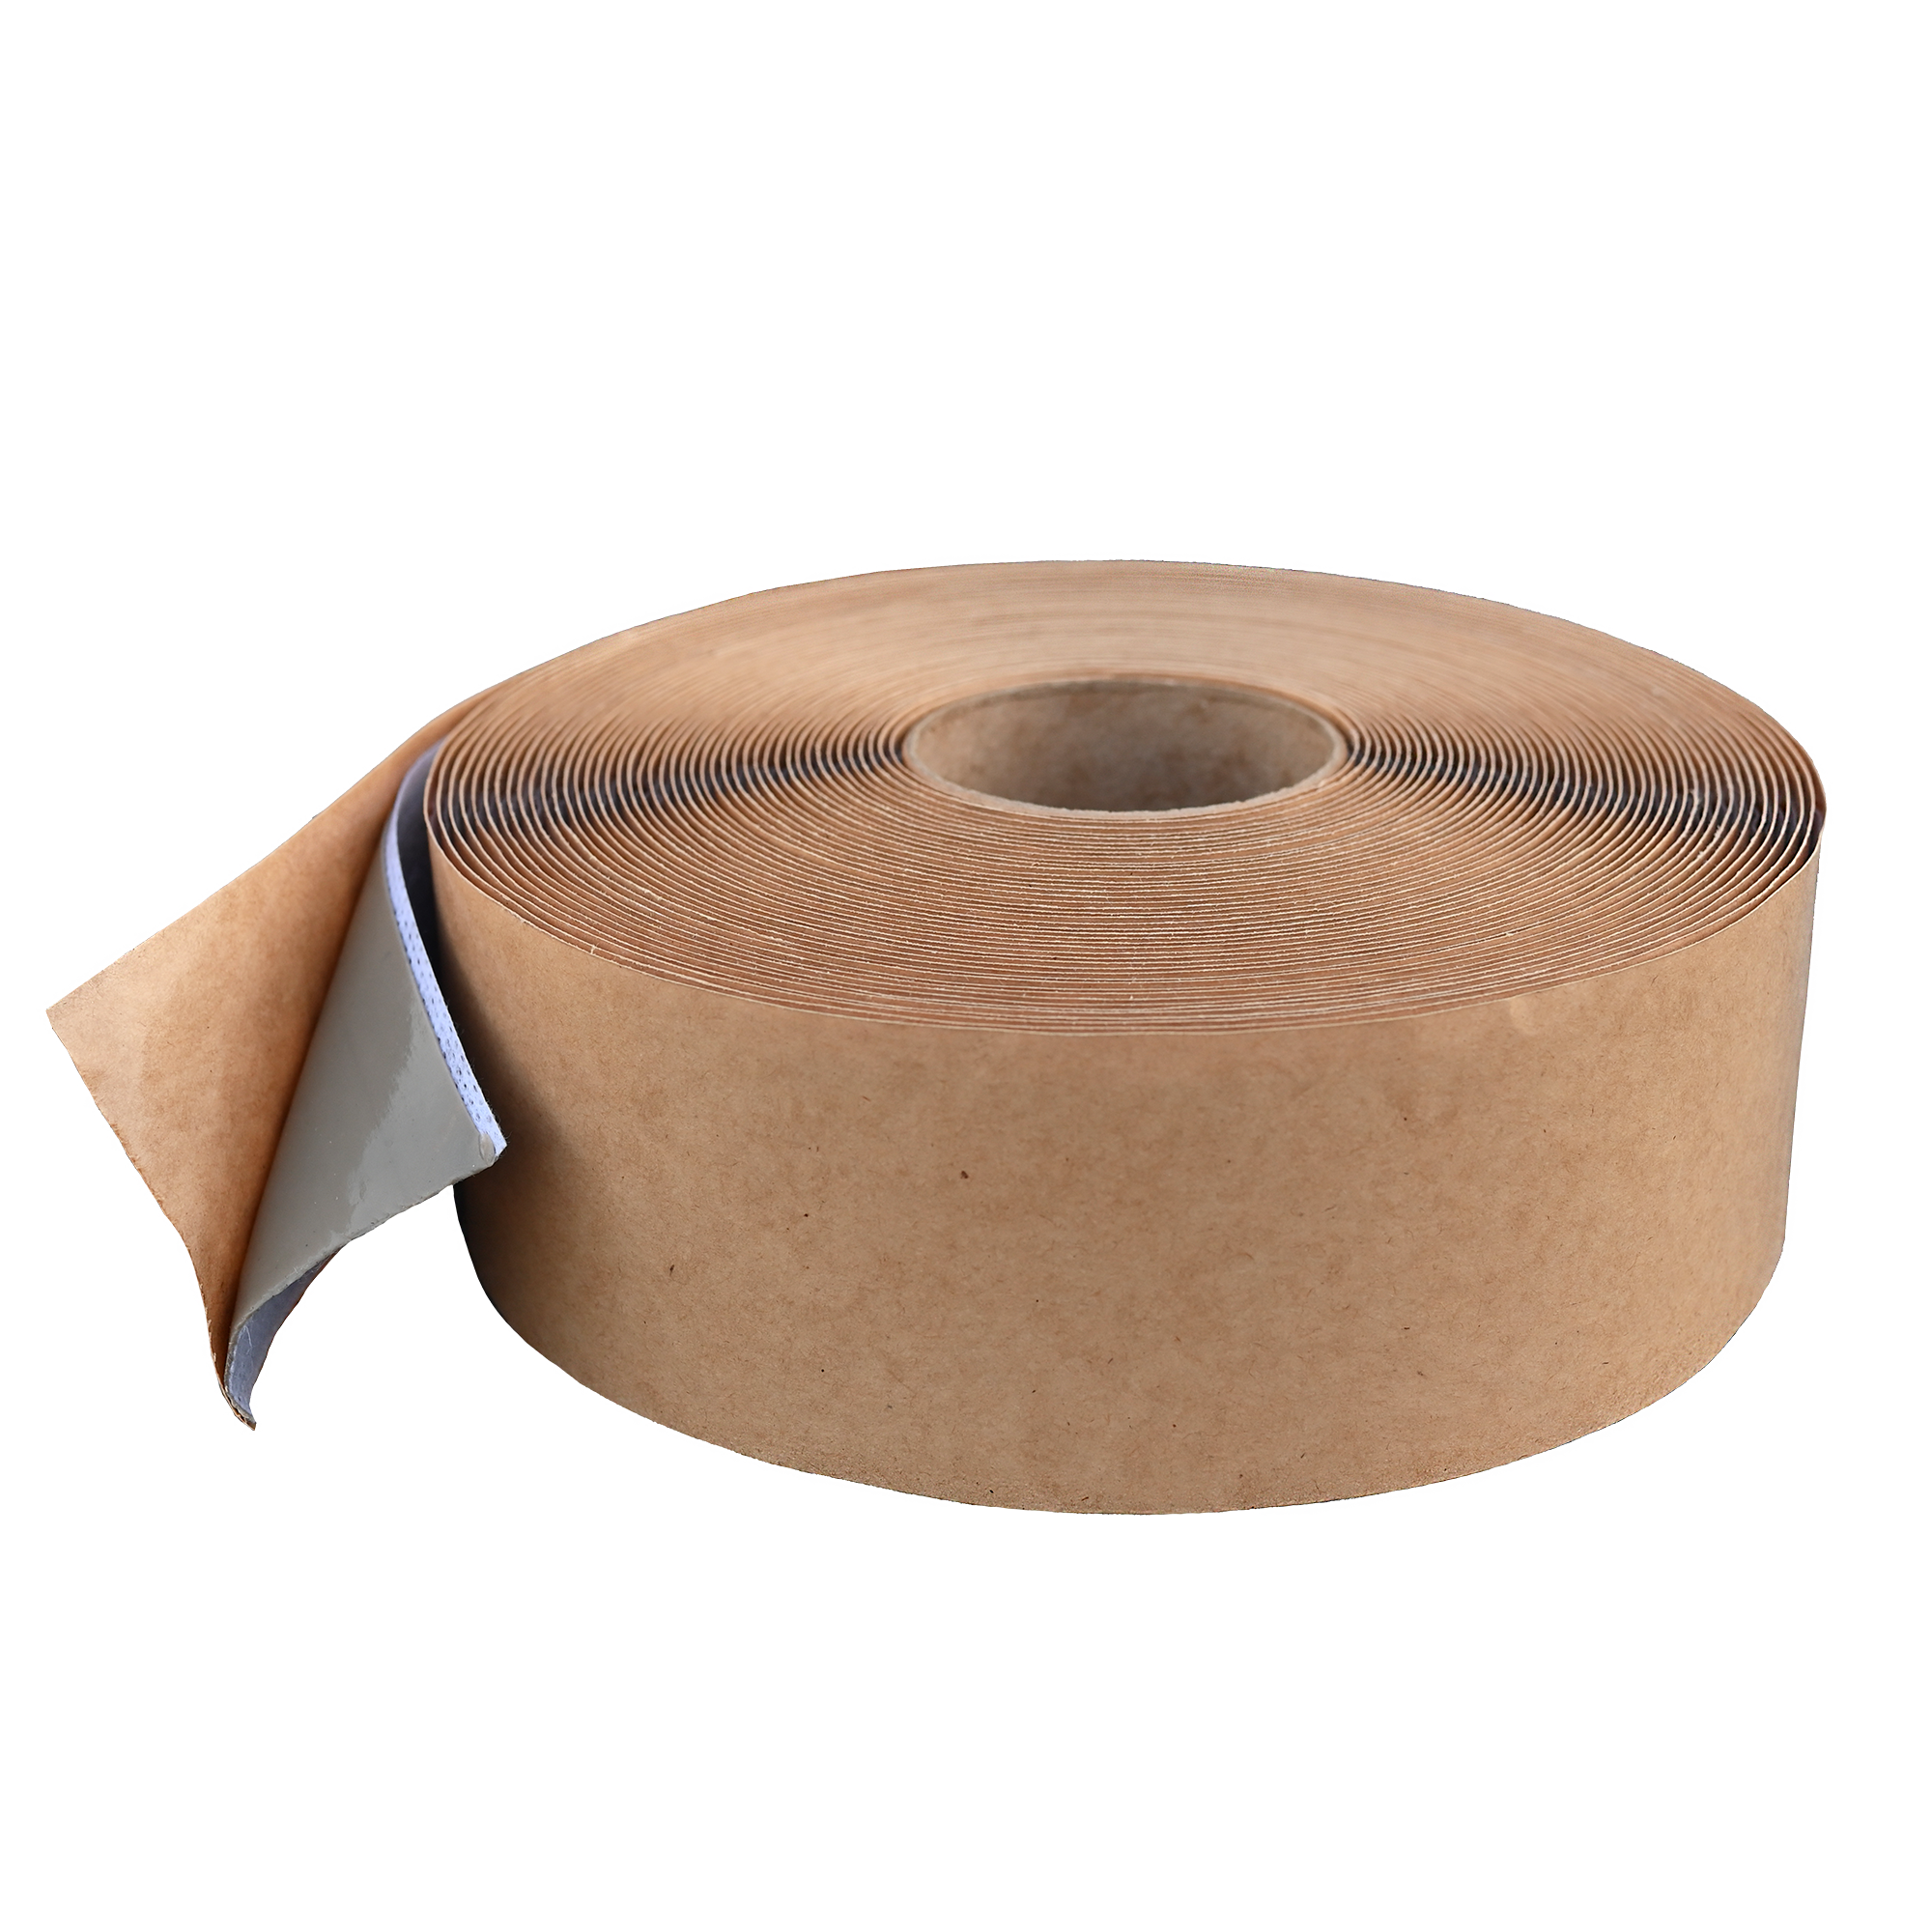 Ames Research Laboratories- Peel & Stick Adhesive Contouring Seam Tape for Reinforcement - 2 x 50